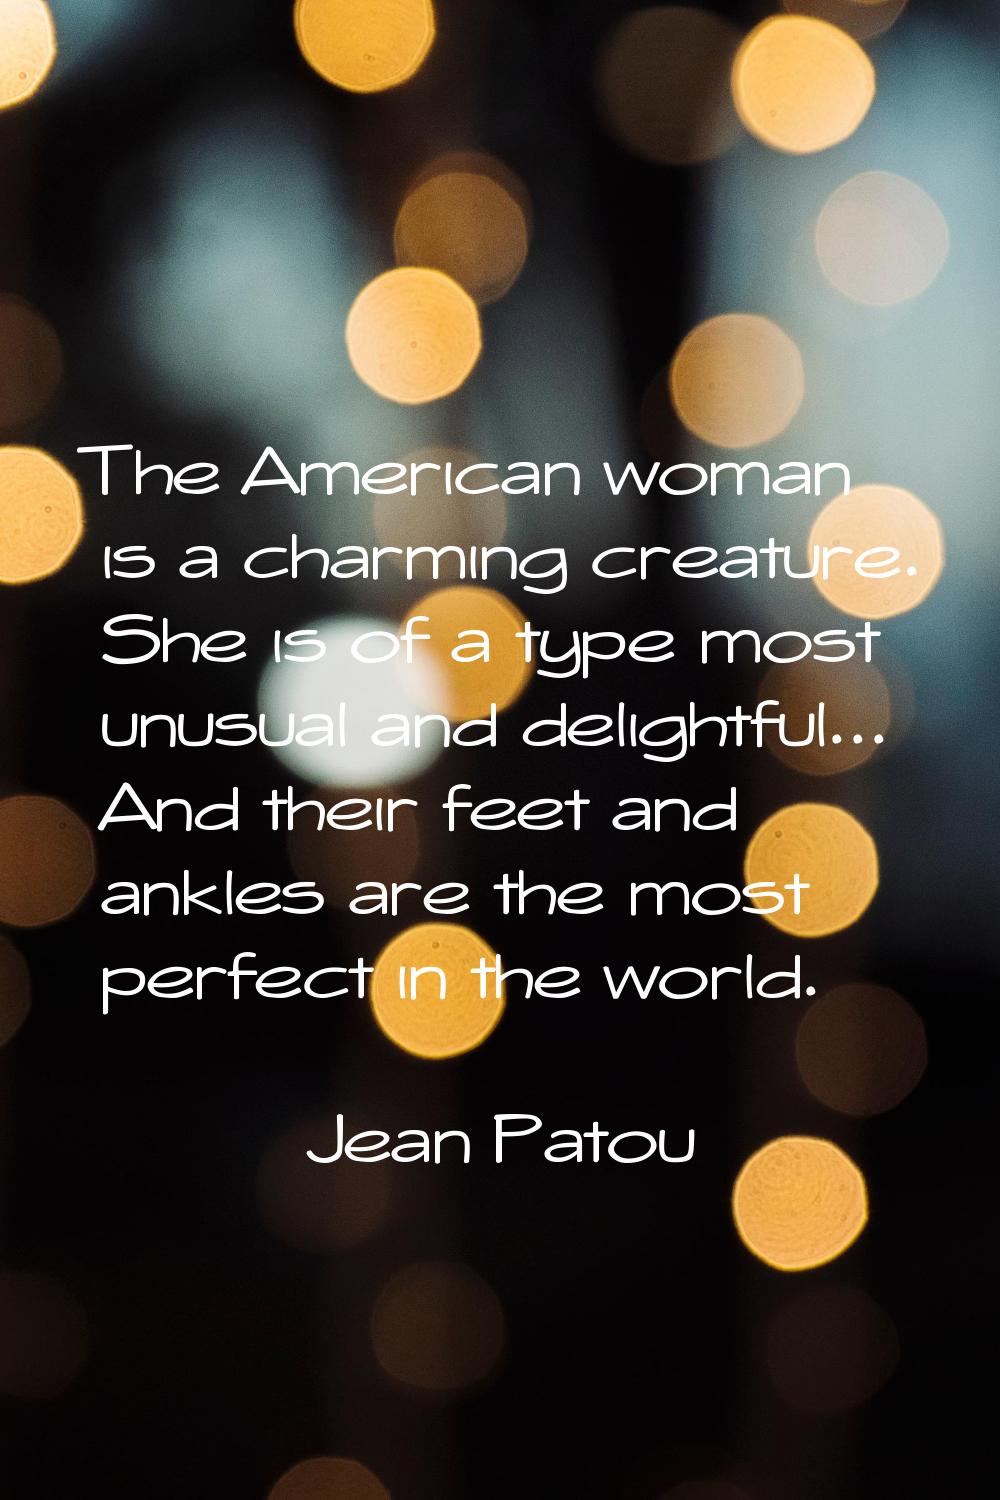 The American woman is a charming creature. She is of a type most unusual and delightful... And thei